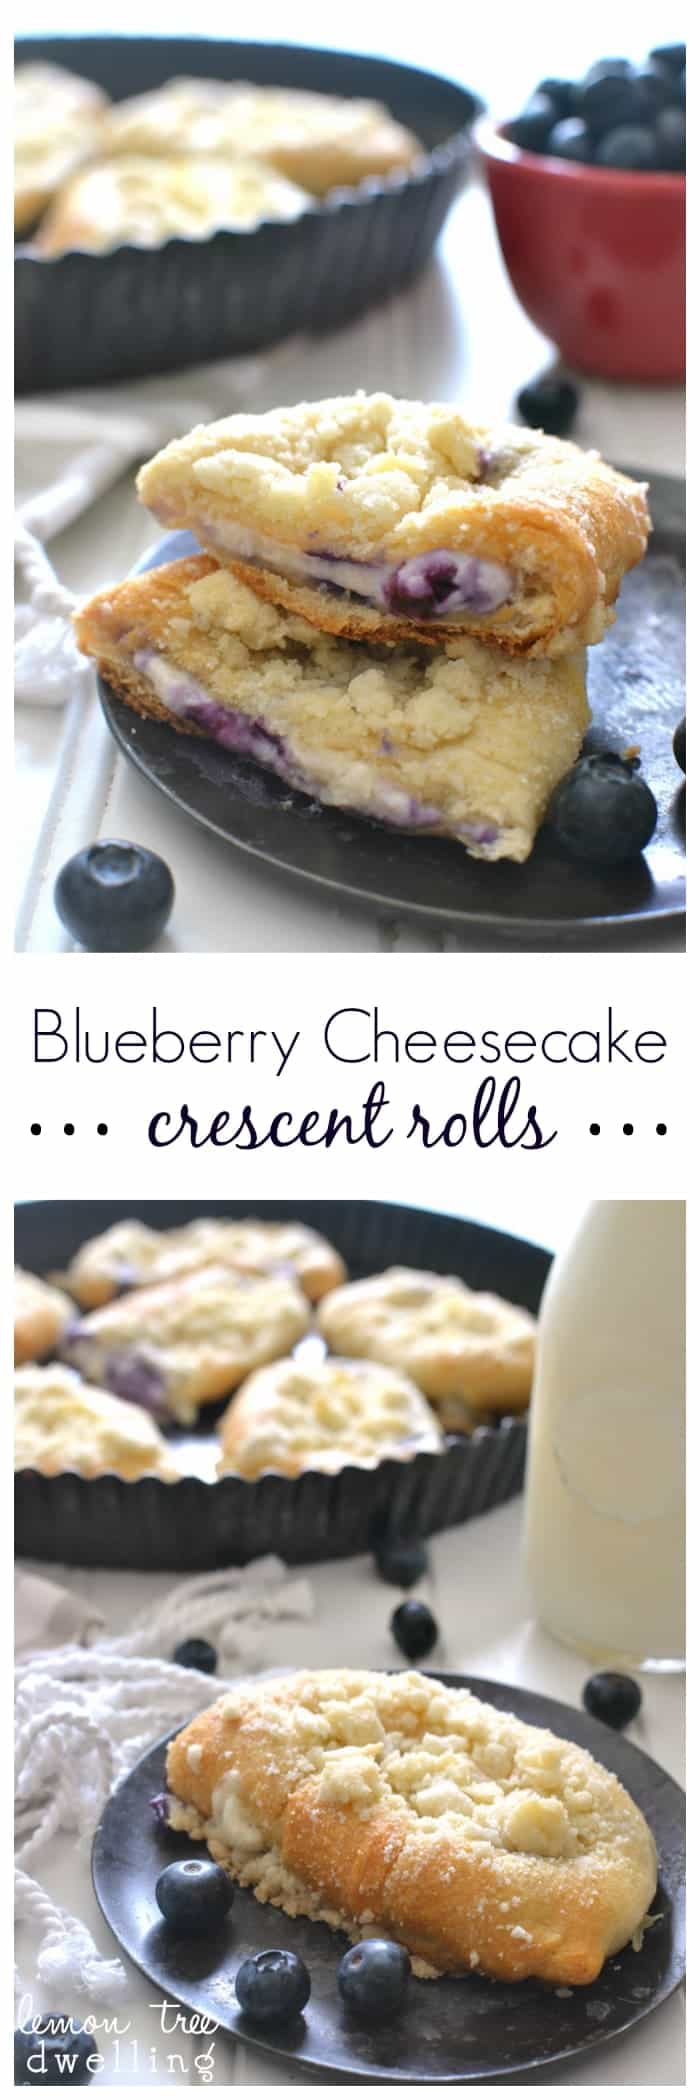 These Blueberry Cheesecake Crescent Rolls are stuffed with a sweet cheesecake filling and bursting with fresh blueberries. Add a buttery streusel topping for an extra special breakfast treat!